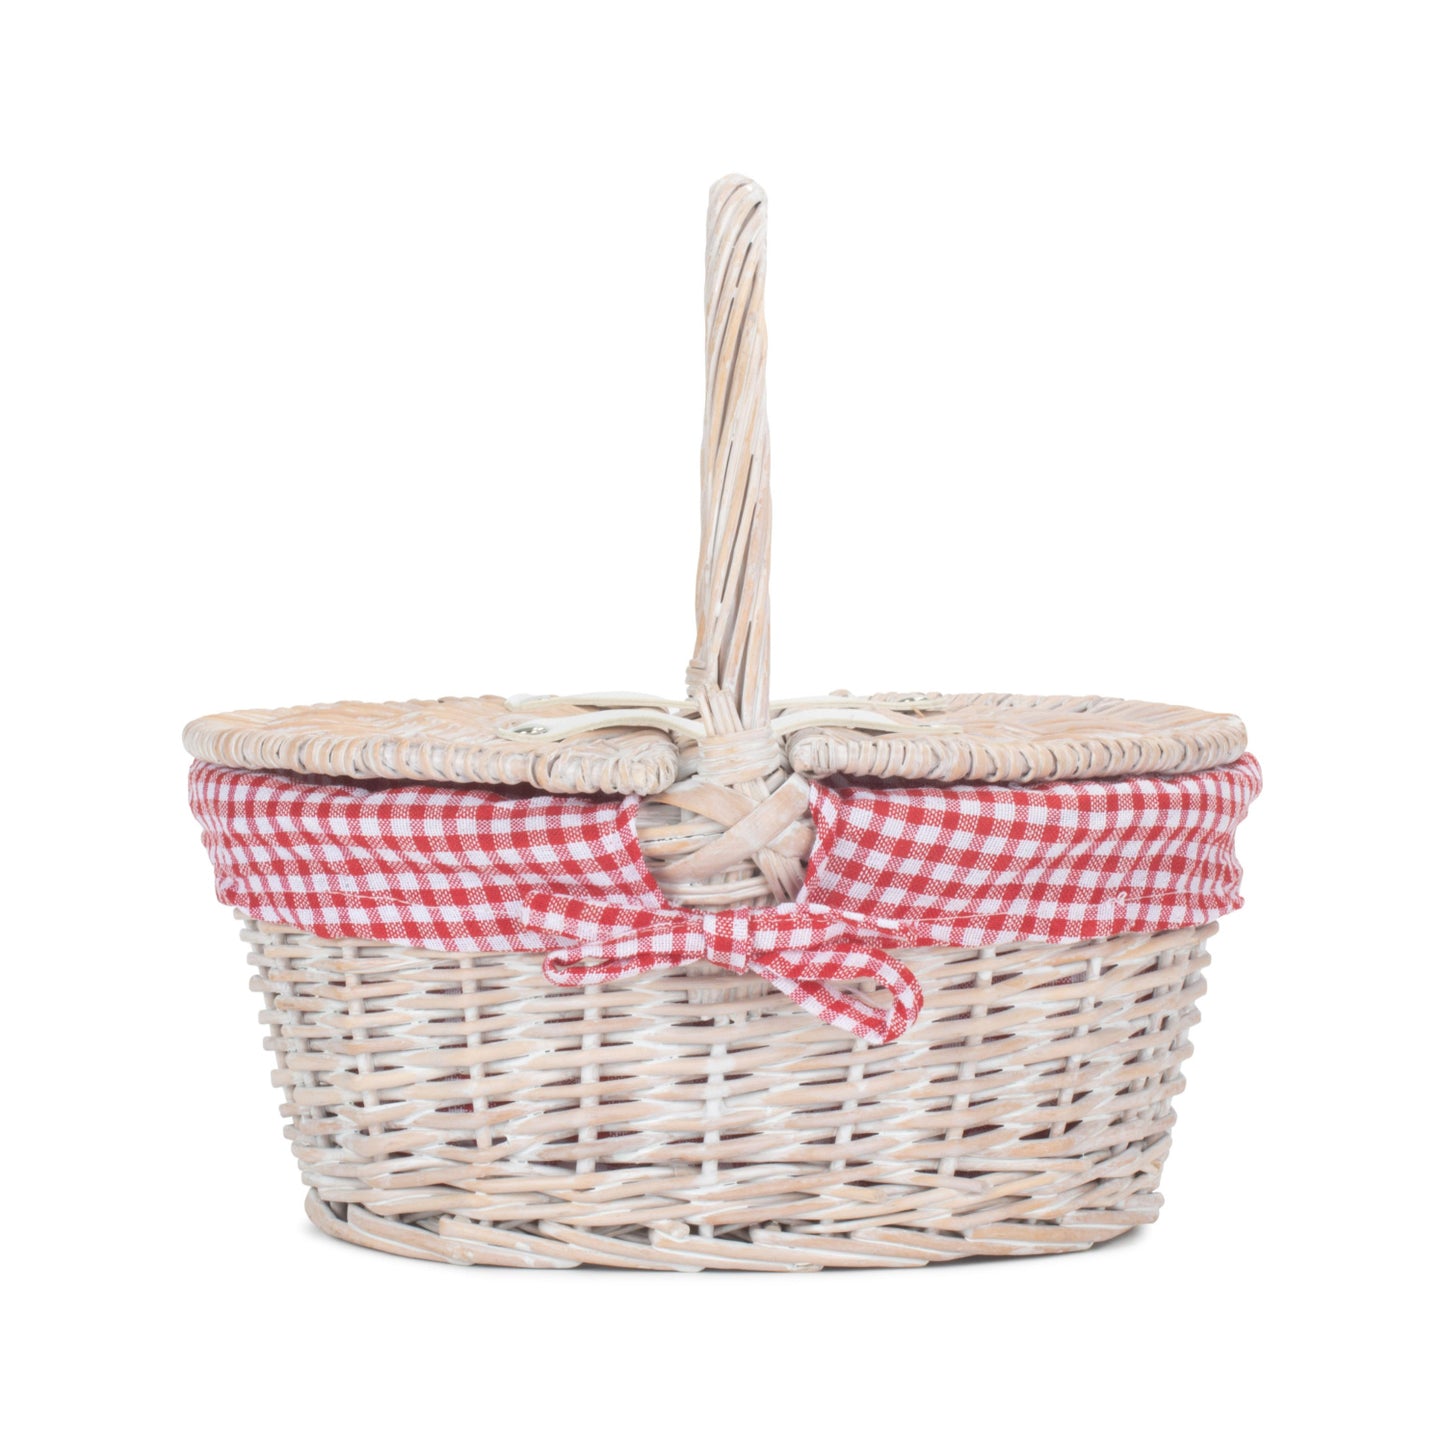 Child's White Wash Lidded Hamper With Red & White Checked Lining